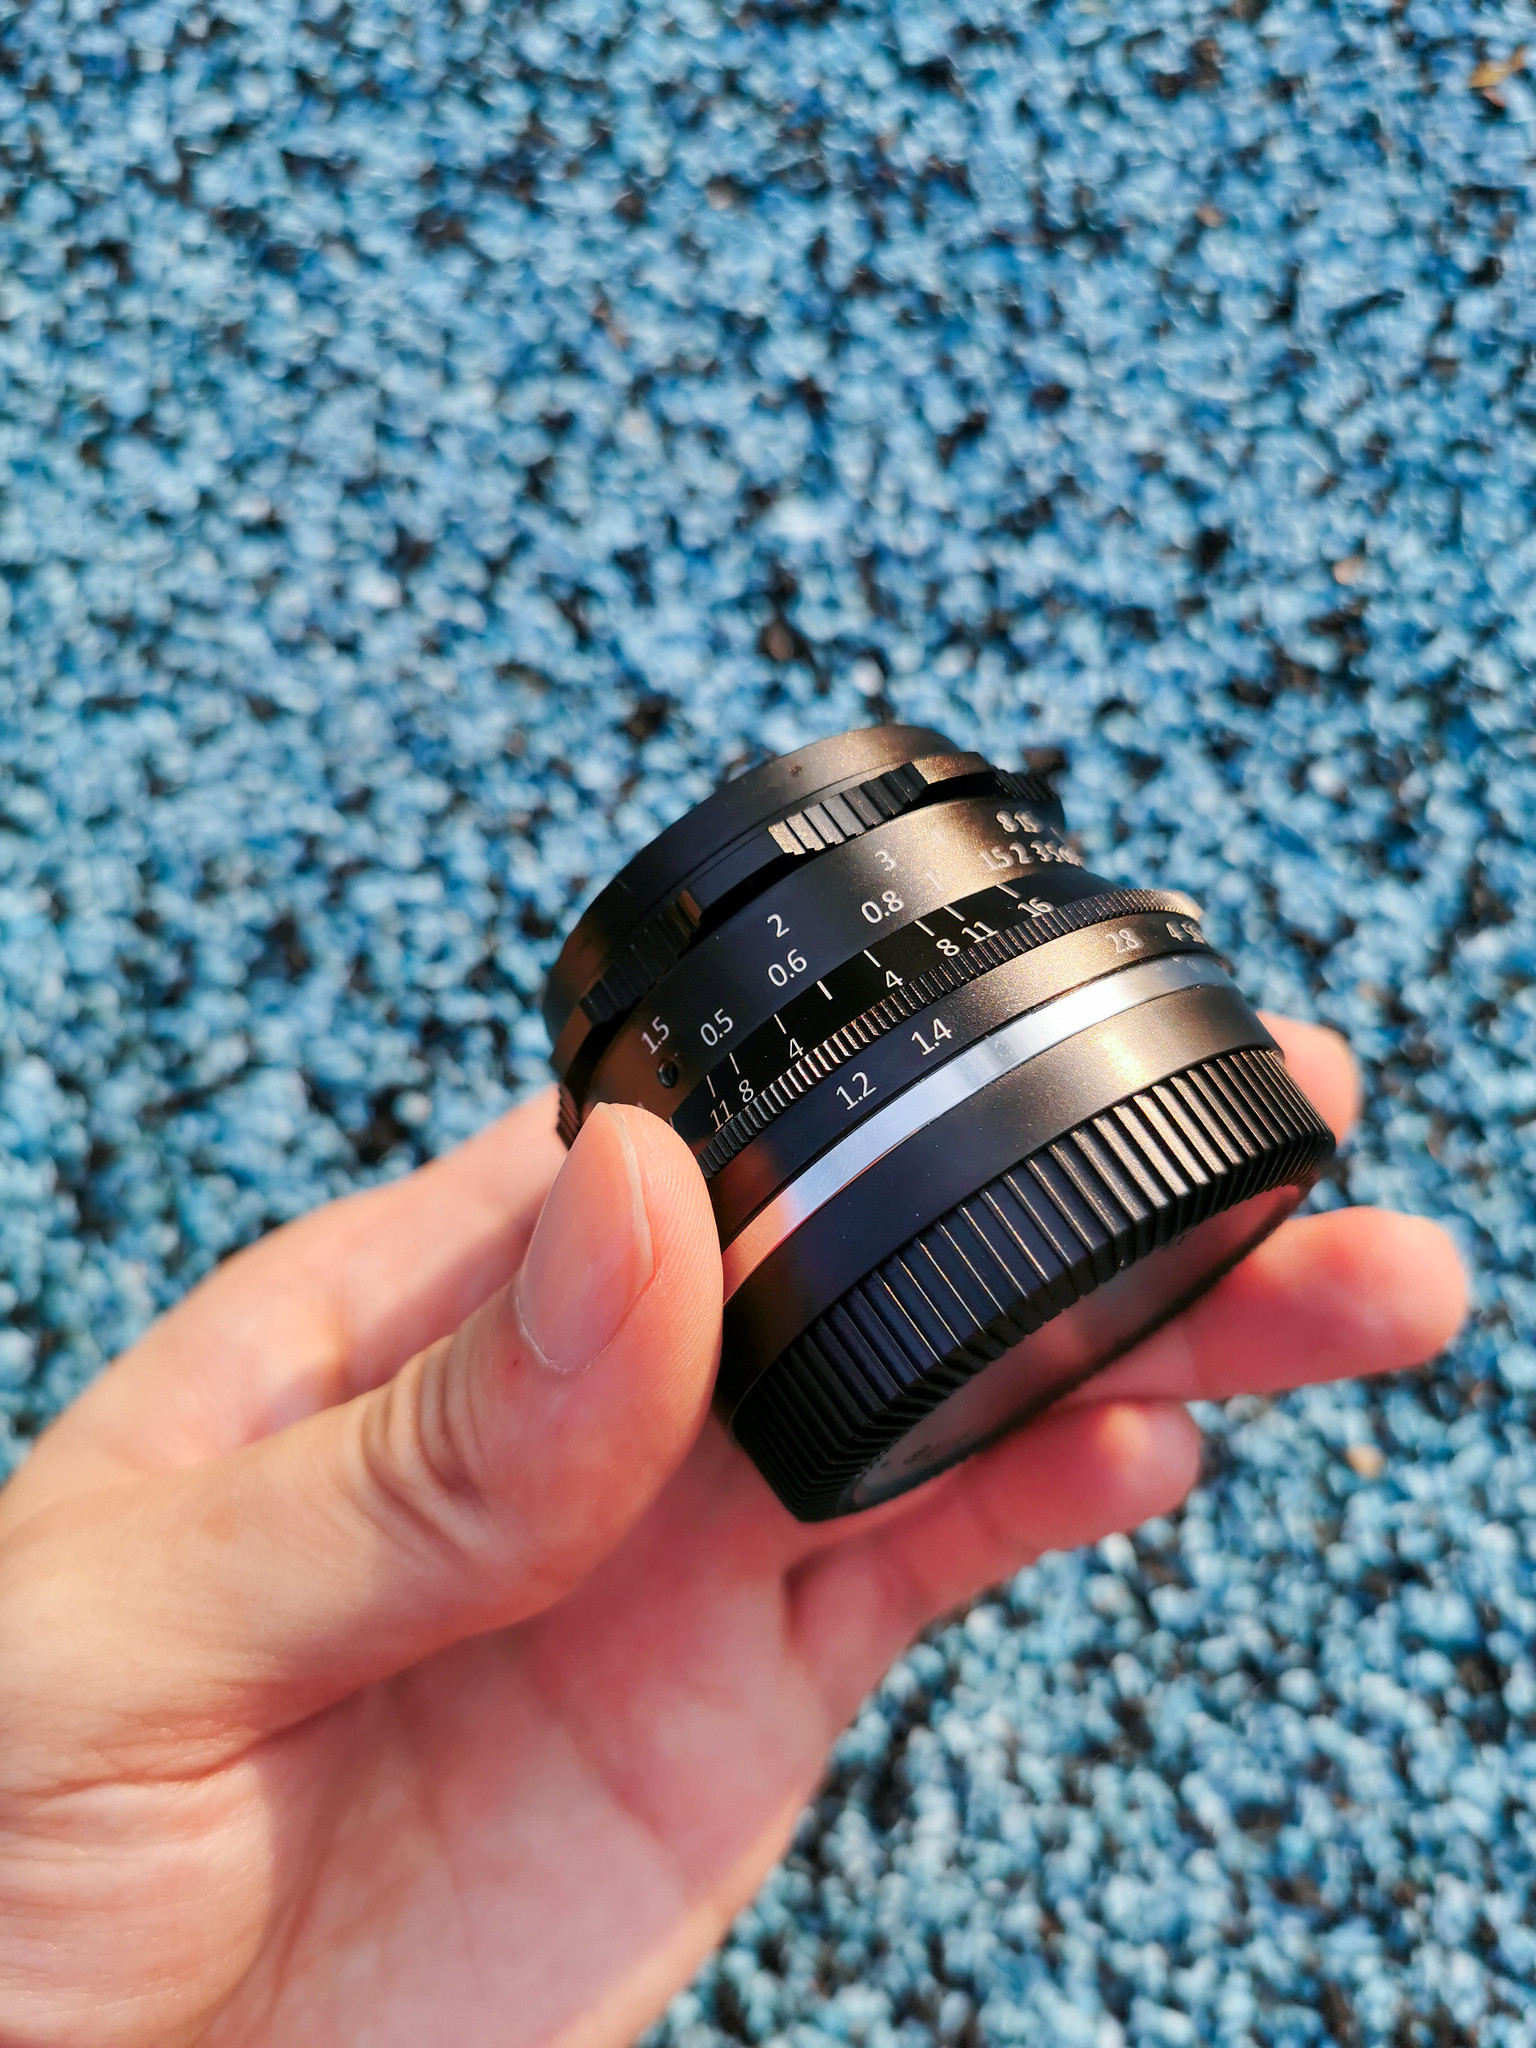 Bokeh in a pocket | Review of the 7Artisans 35mm f1.2 lens for